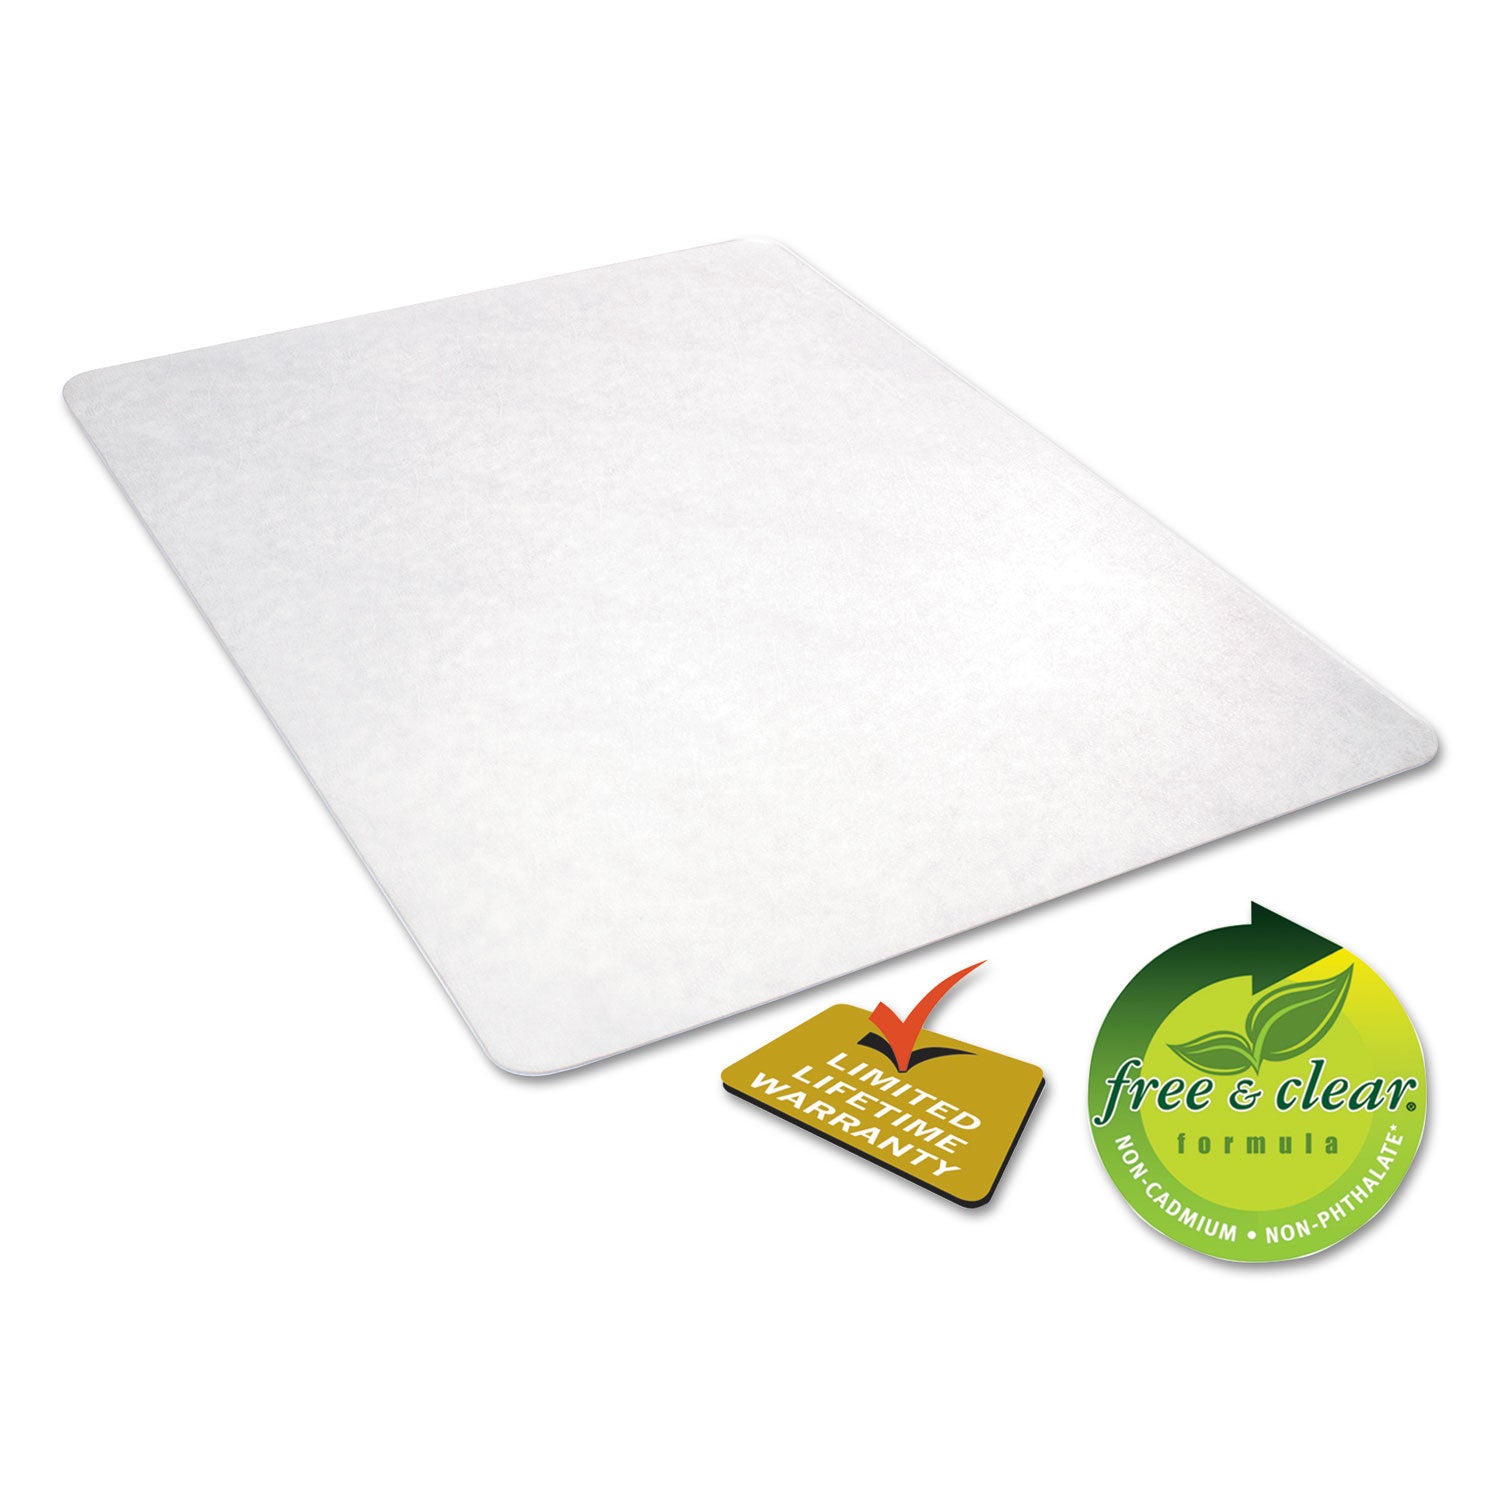 all-day-use-non-studded-chair-mat-for-hard-floors-46-x-60-rectangular-clear_alemat4660hfr - 5